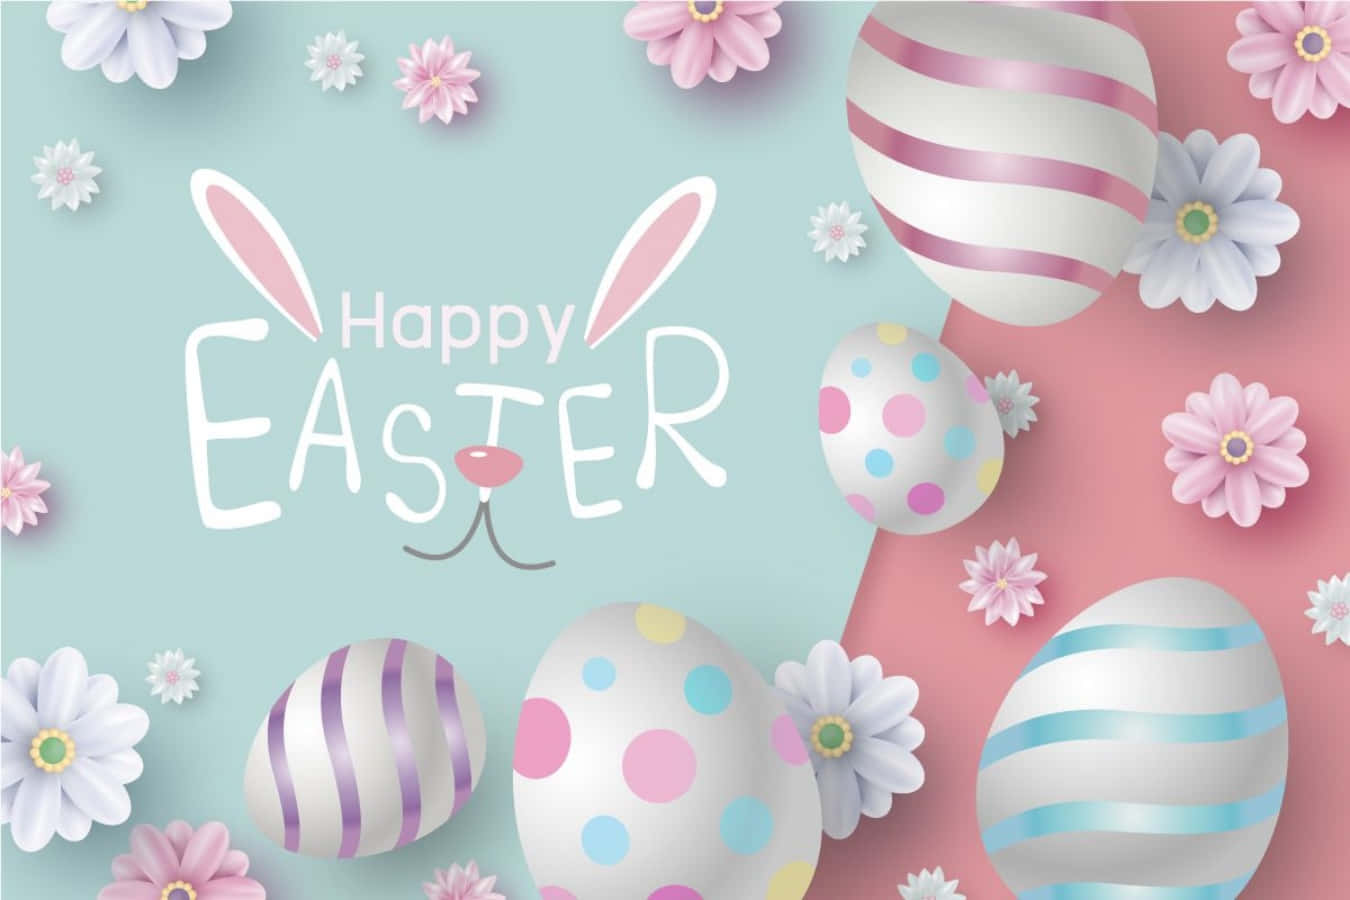 Wishing you all a warm and Happy Easter!